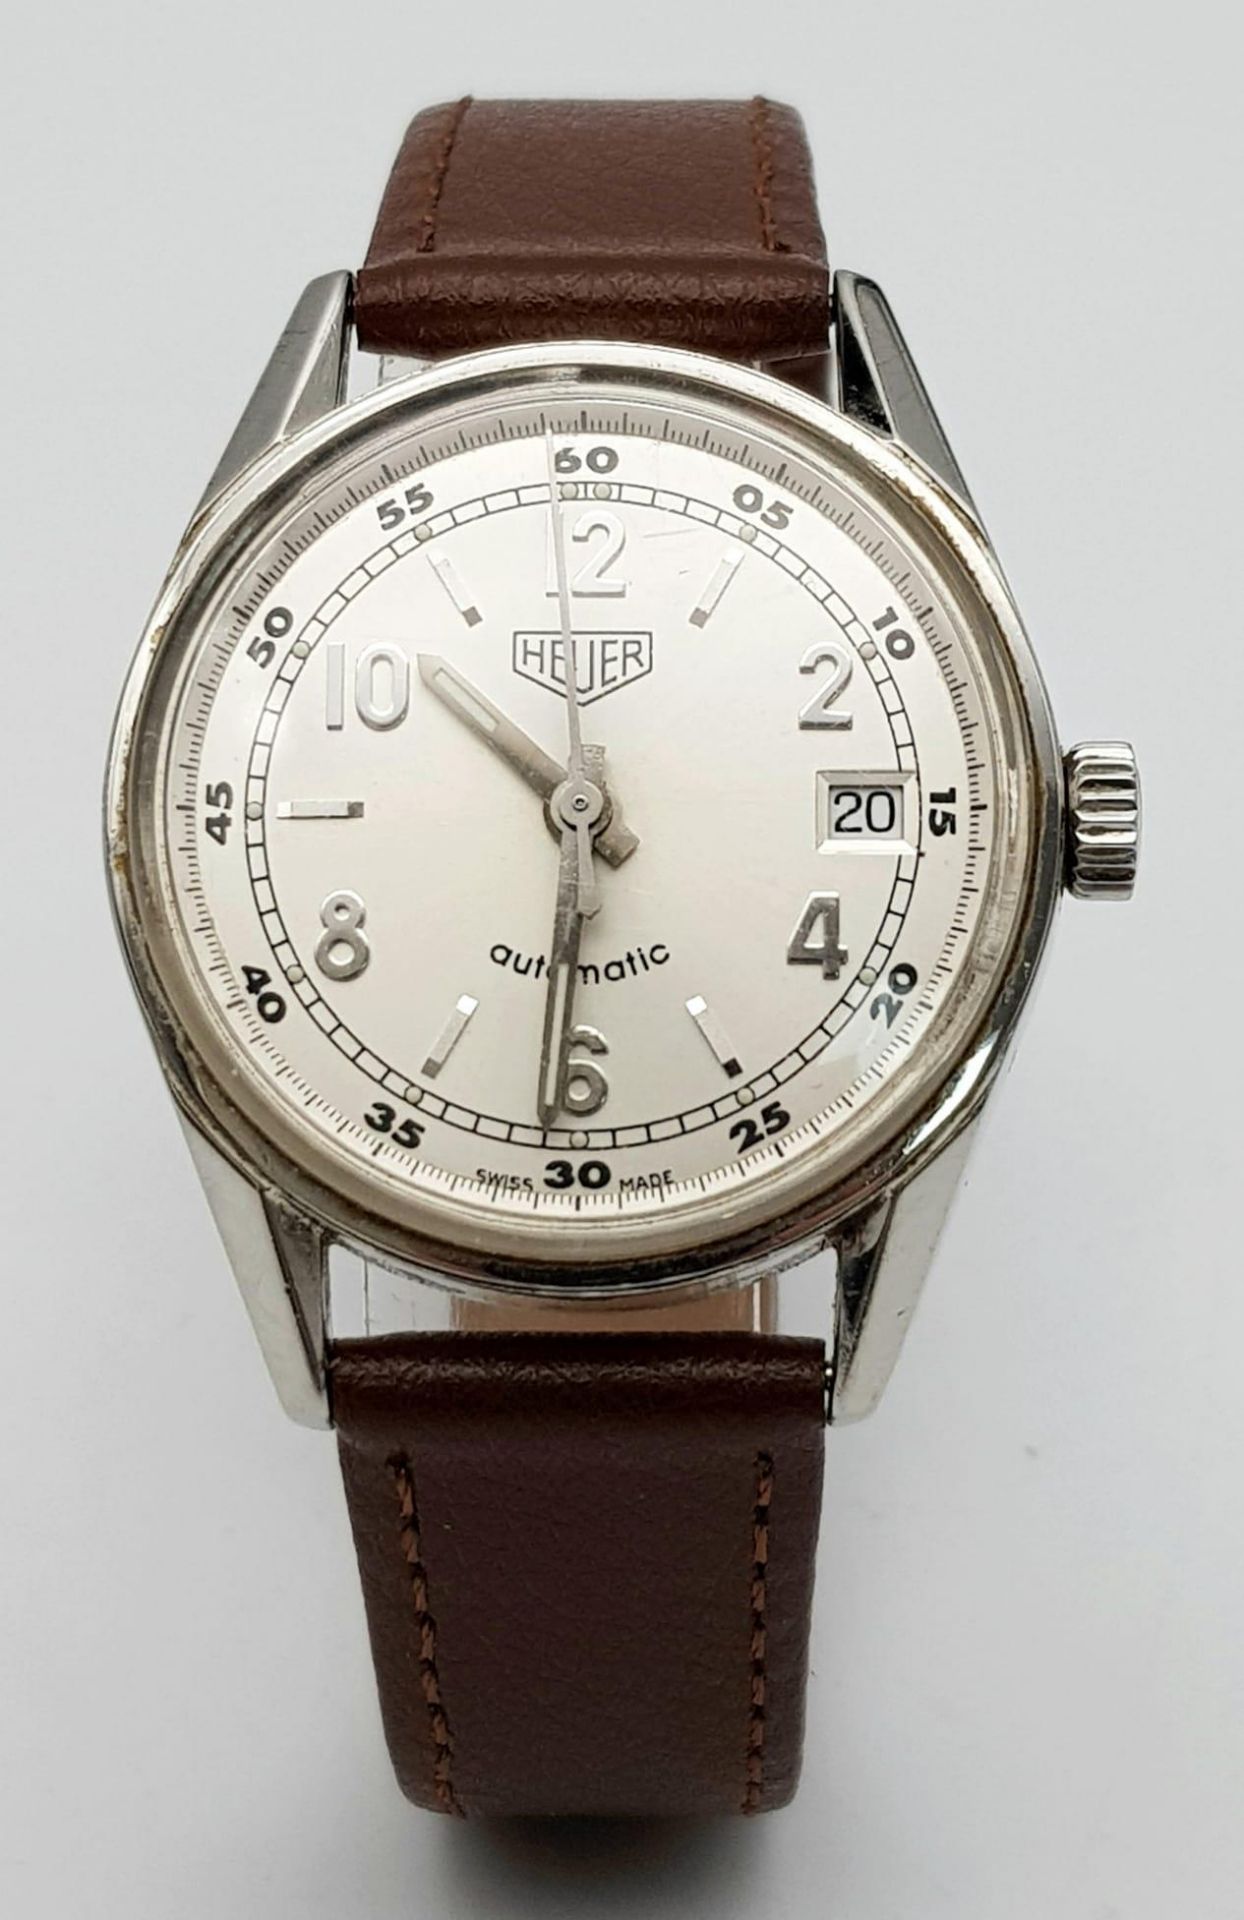 A Tag Heuer Automatic Gents Watch. Brown leather strap. Stainless steel case - 36mm. Silver tone - Image 2 of 7